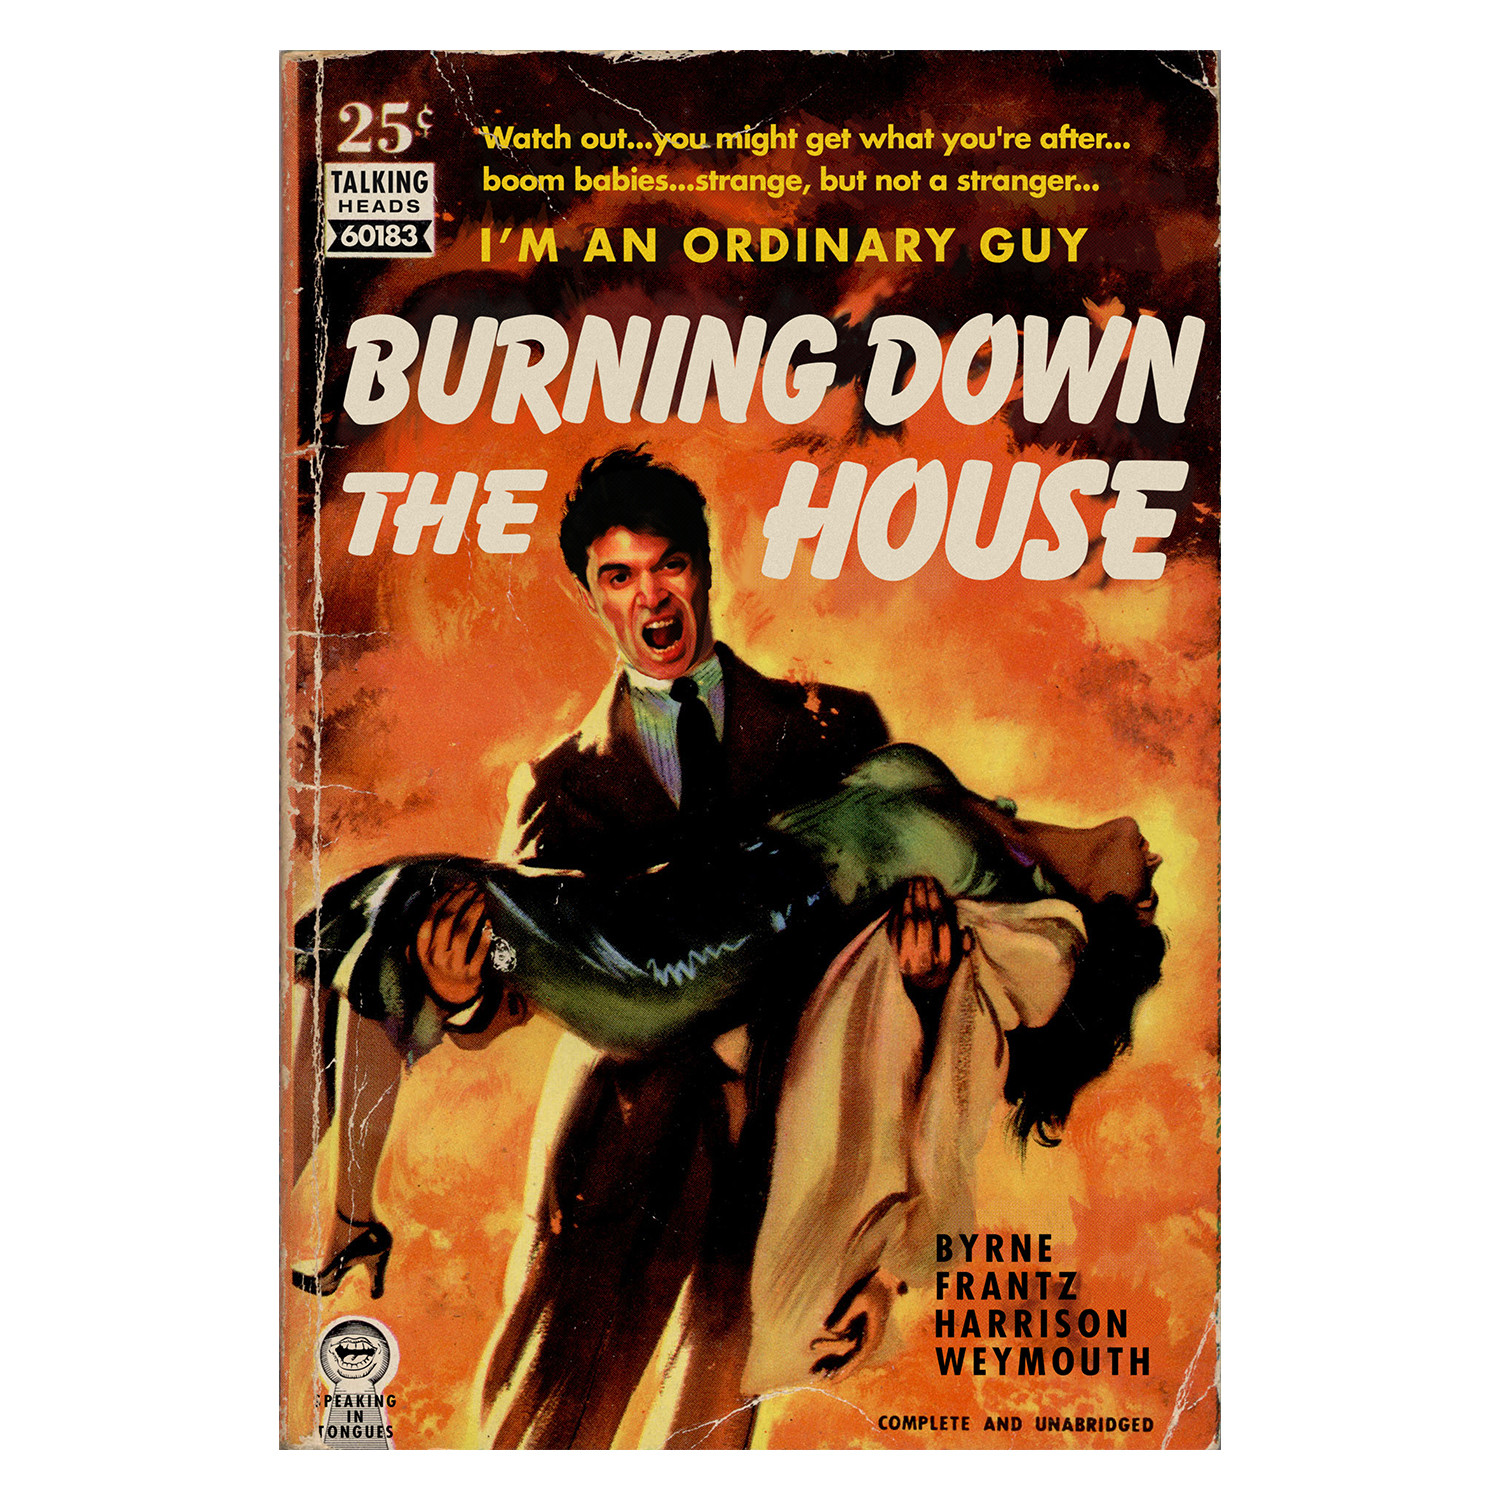 Talking Heads "Burning Down The House" Pulp Novel Mashup (8.5"W x 11"H x  0.1"D) - Todd Alcott - Touch of Modern